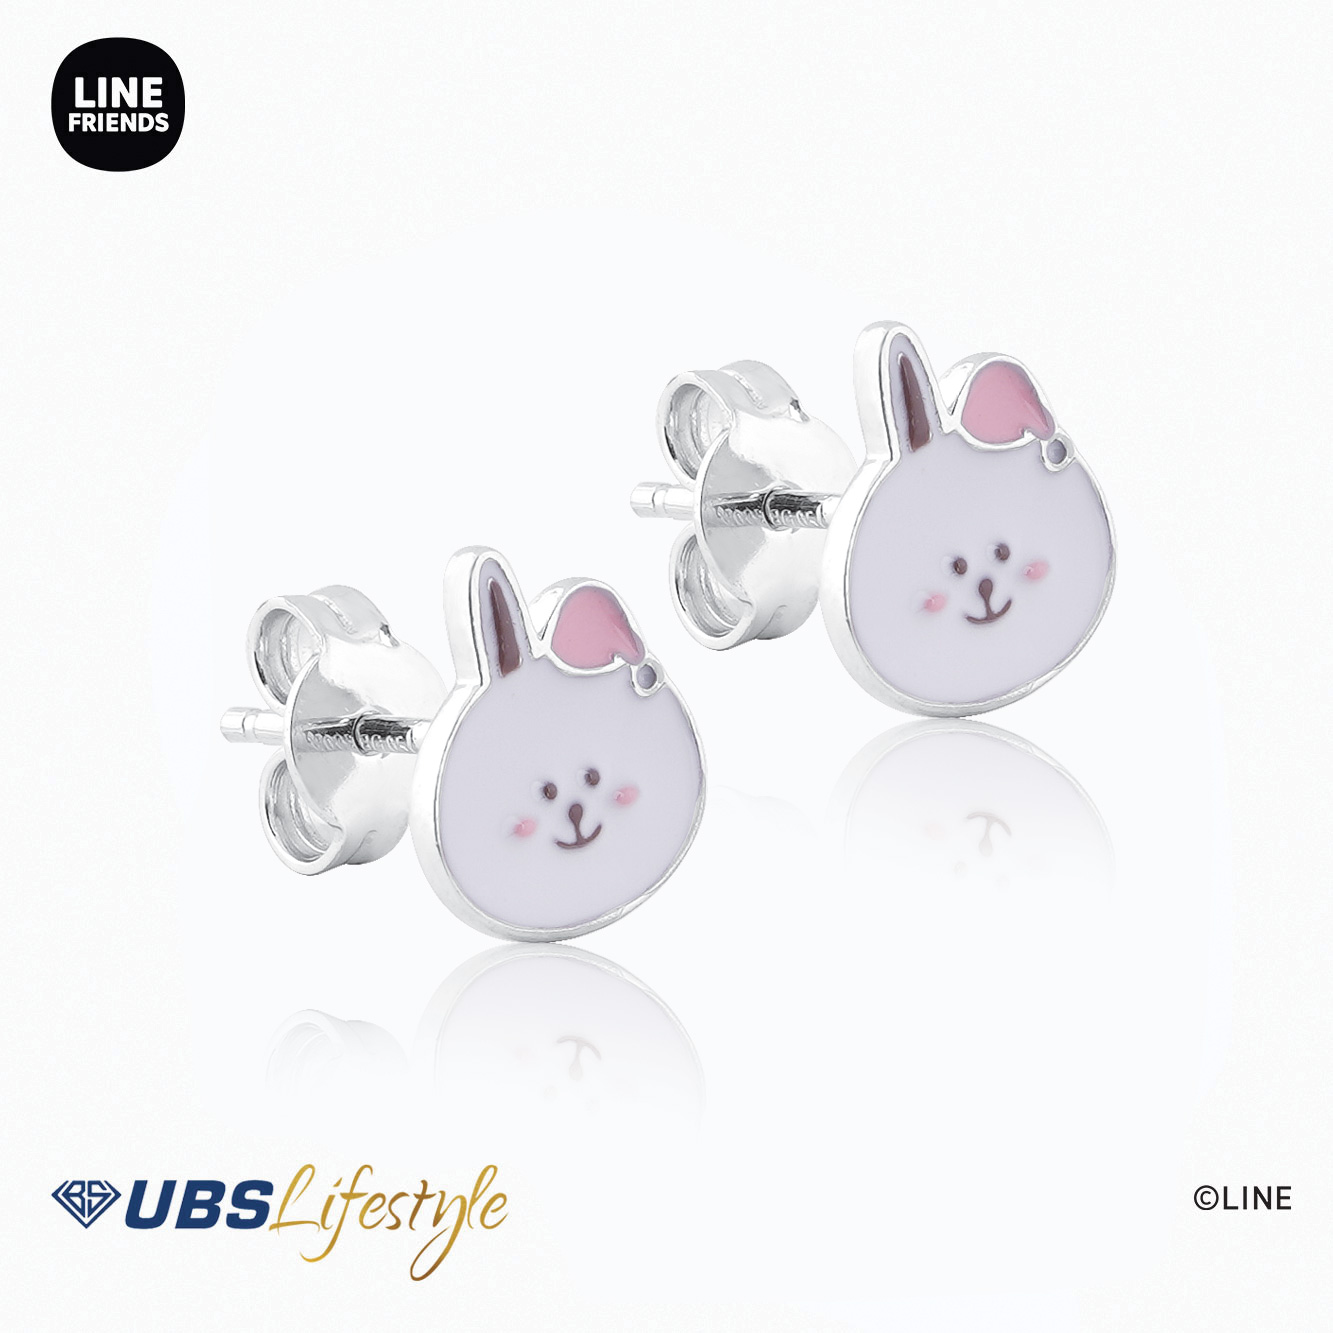 UBS Anting Emas Line Friends Cony - Ahw0011 - 17K